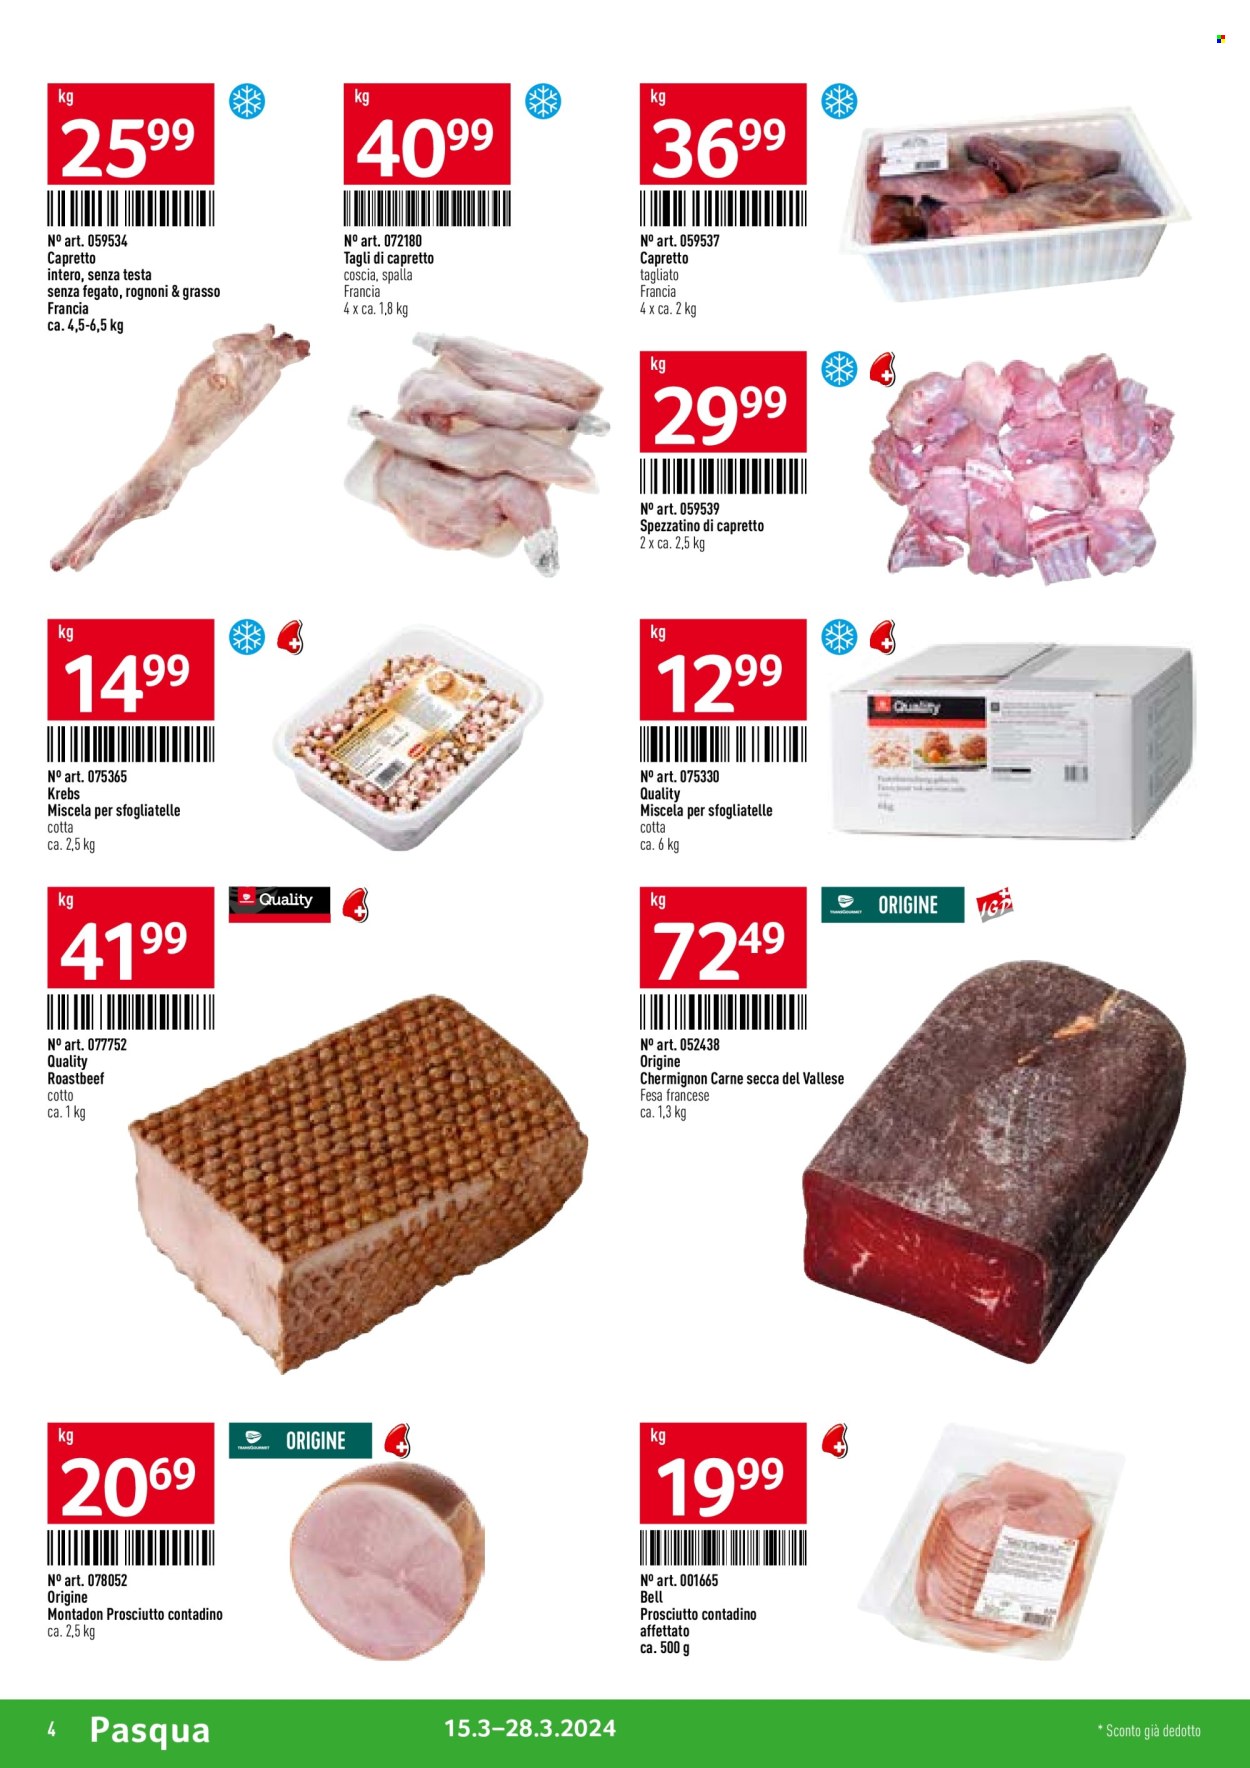 Catalogue TransGourmet - 15.3.2024 - 28.3.2024. Page 4.